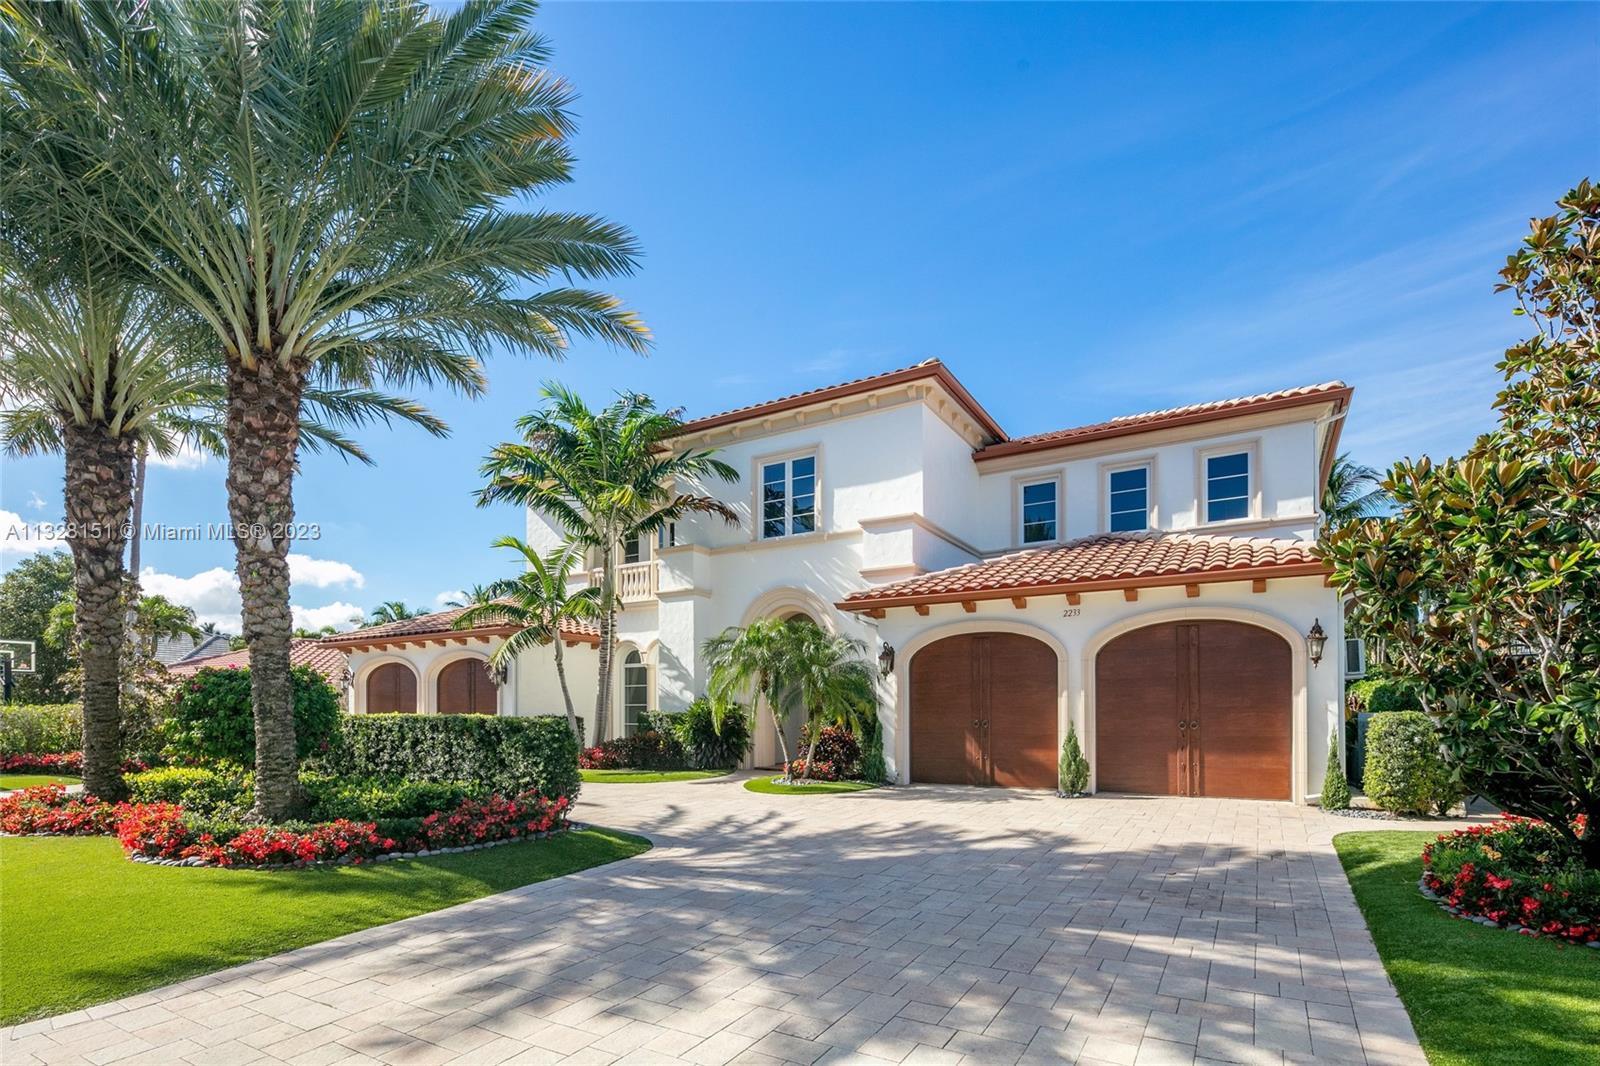 First Time on the Market! Stunning Mizner inspired Mediterranean home designed by renowned Architect